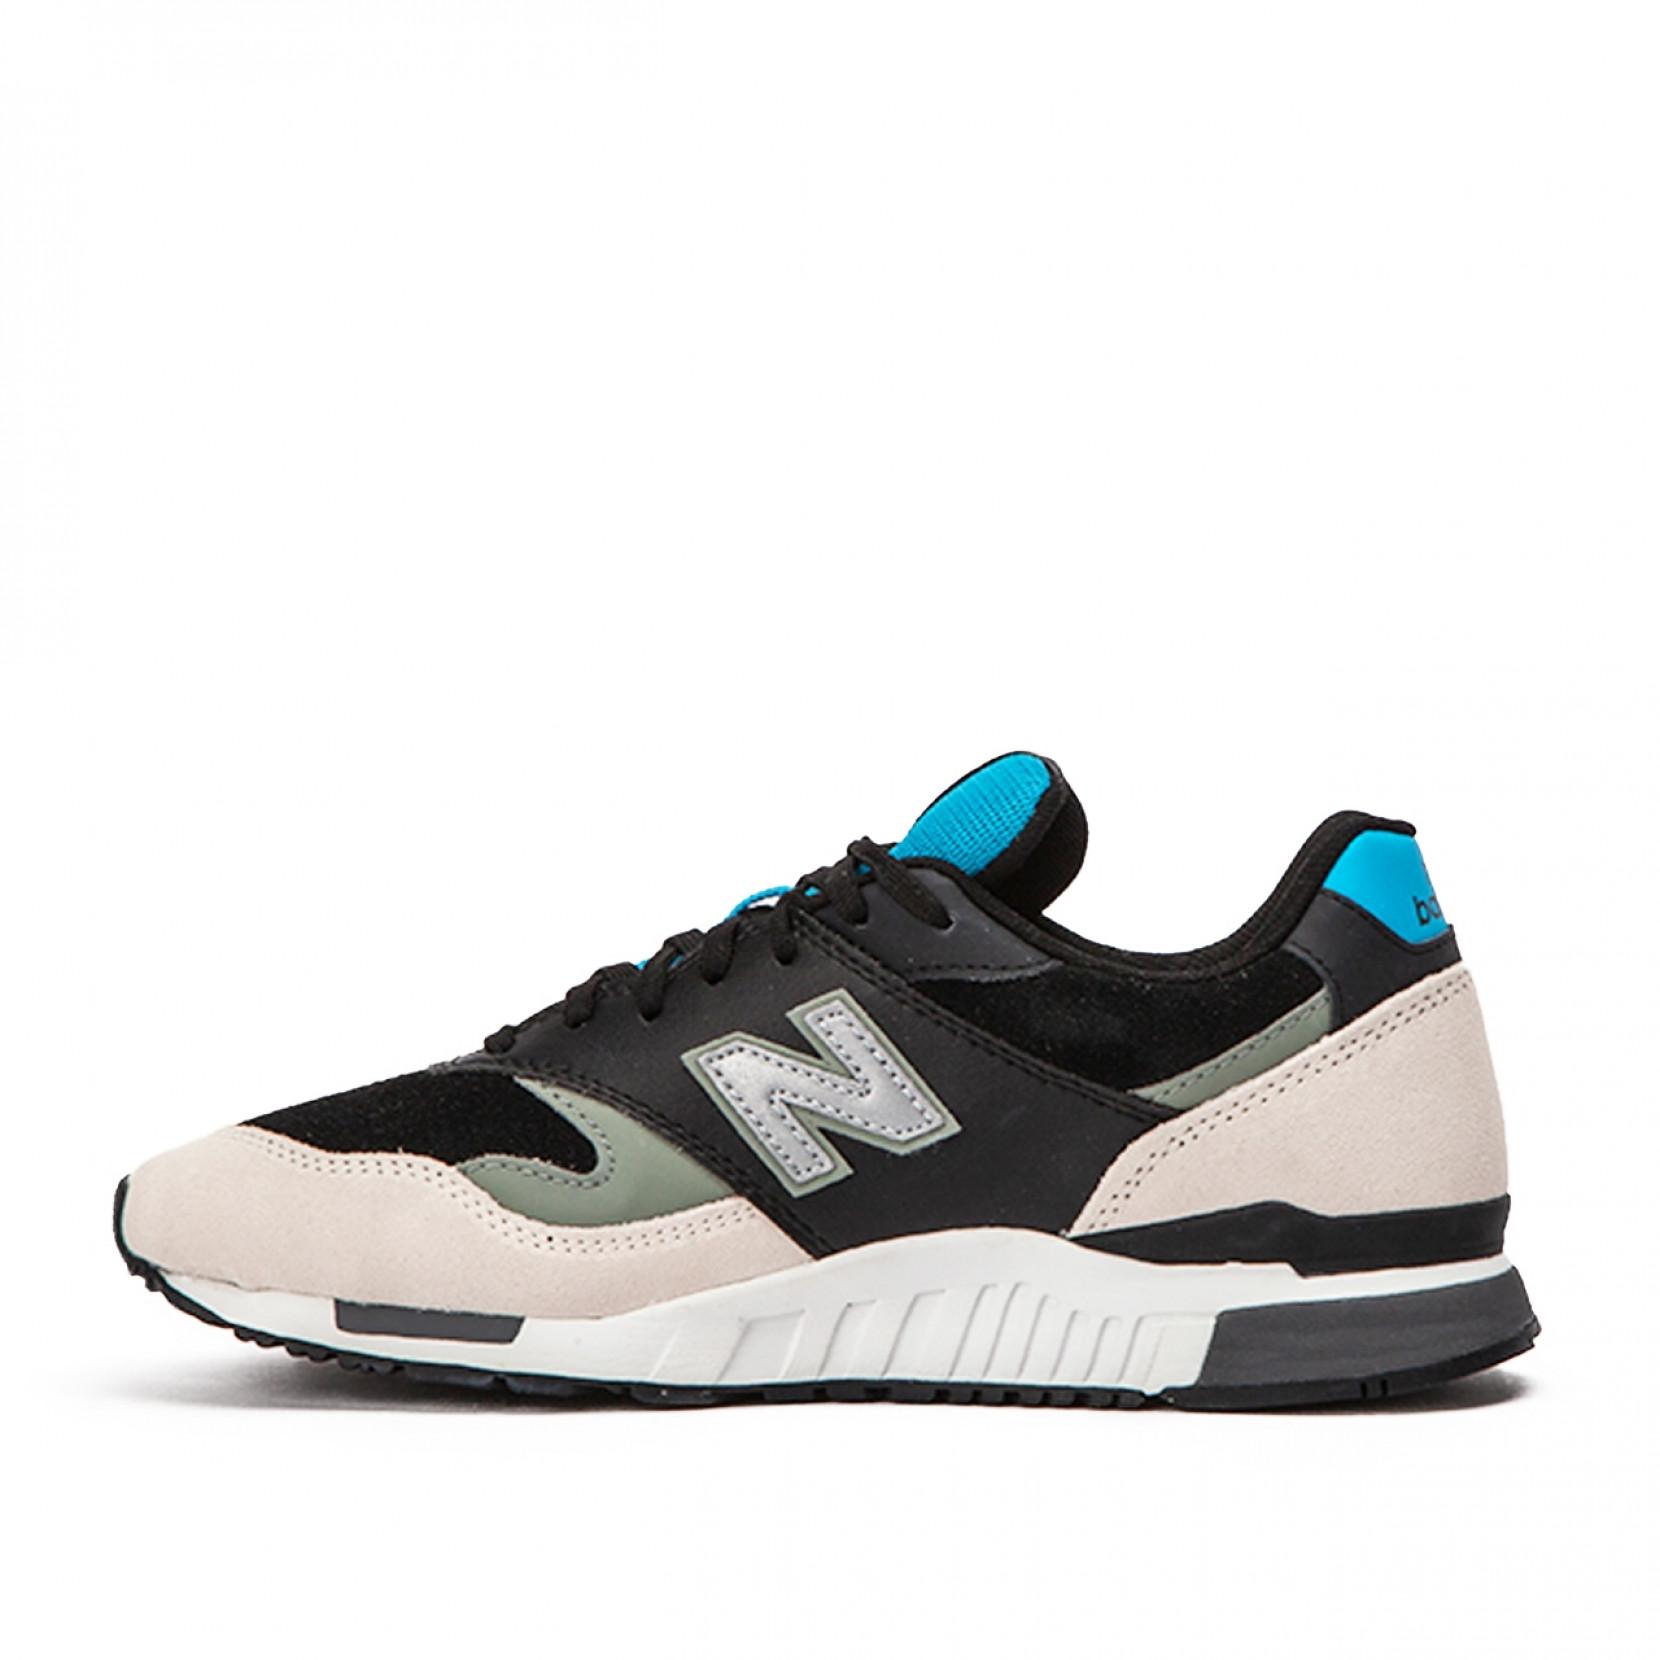 New Balance Ml840 Ntb in Black for Men - Lyst